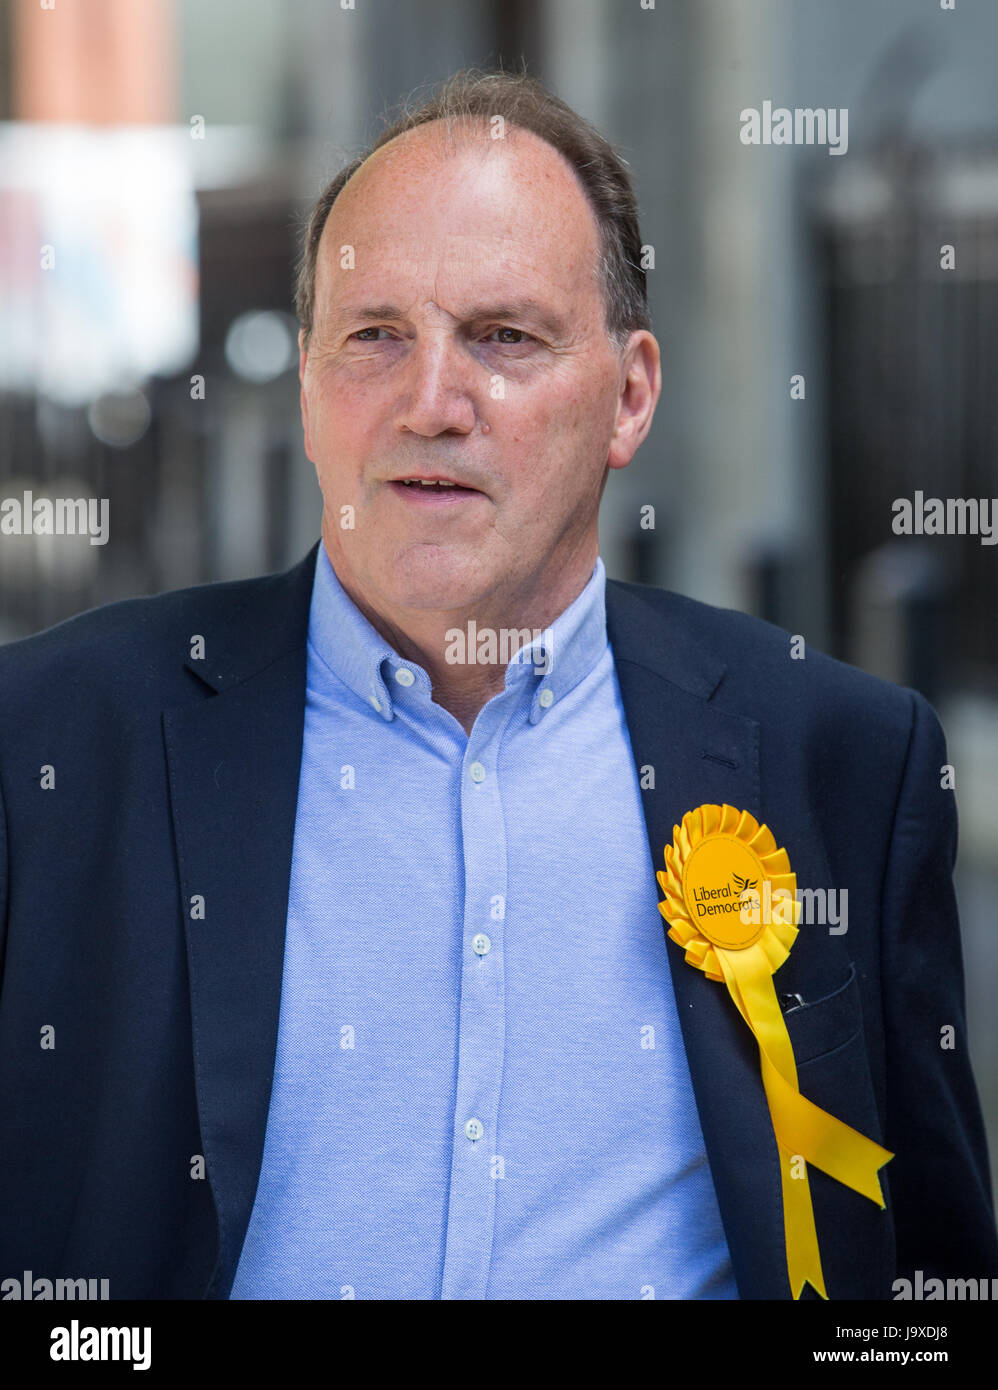 Former Lib Dem MP, Simon Hughes, demonstrates outside parliament about Theresa May's 'Dementia Tax'. He stood for election in Bermondsey and Old South Stock Photo